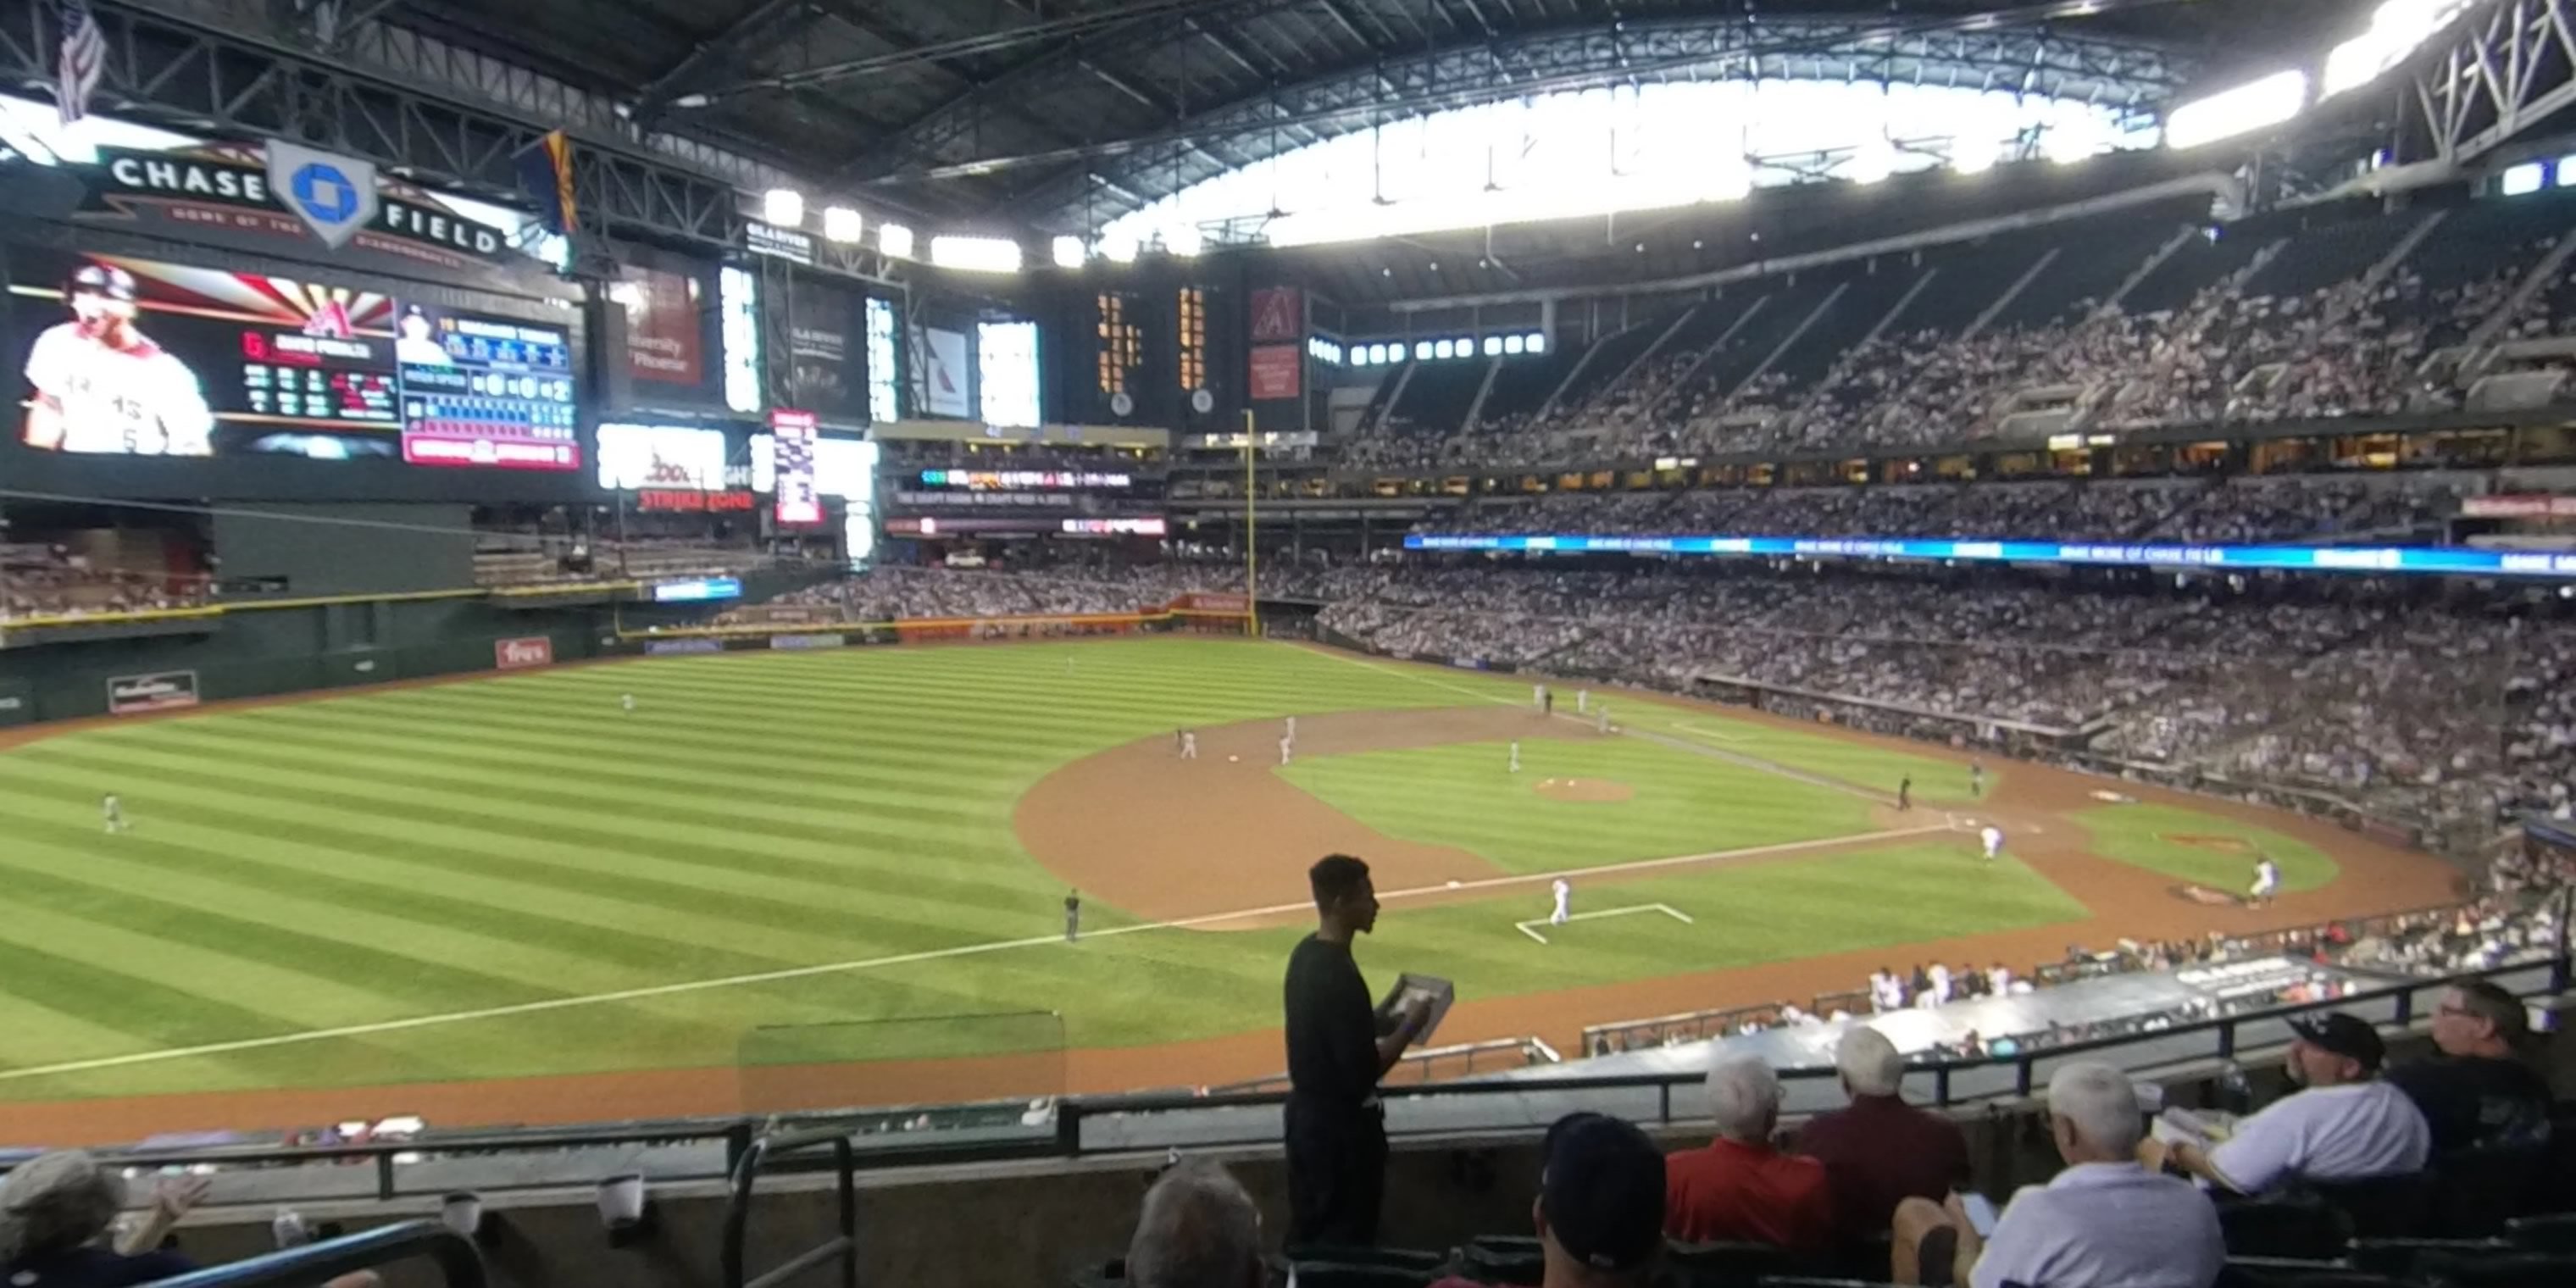 section 214 panoramic seat view  for baseball - chase field